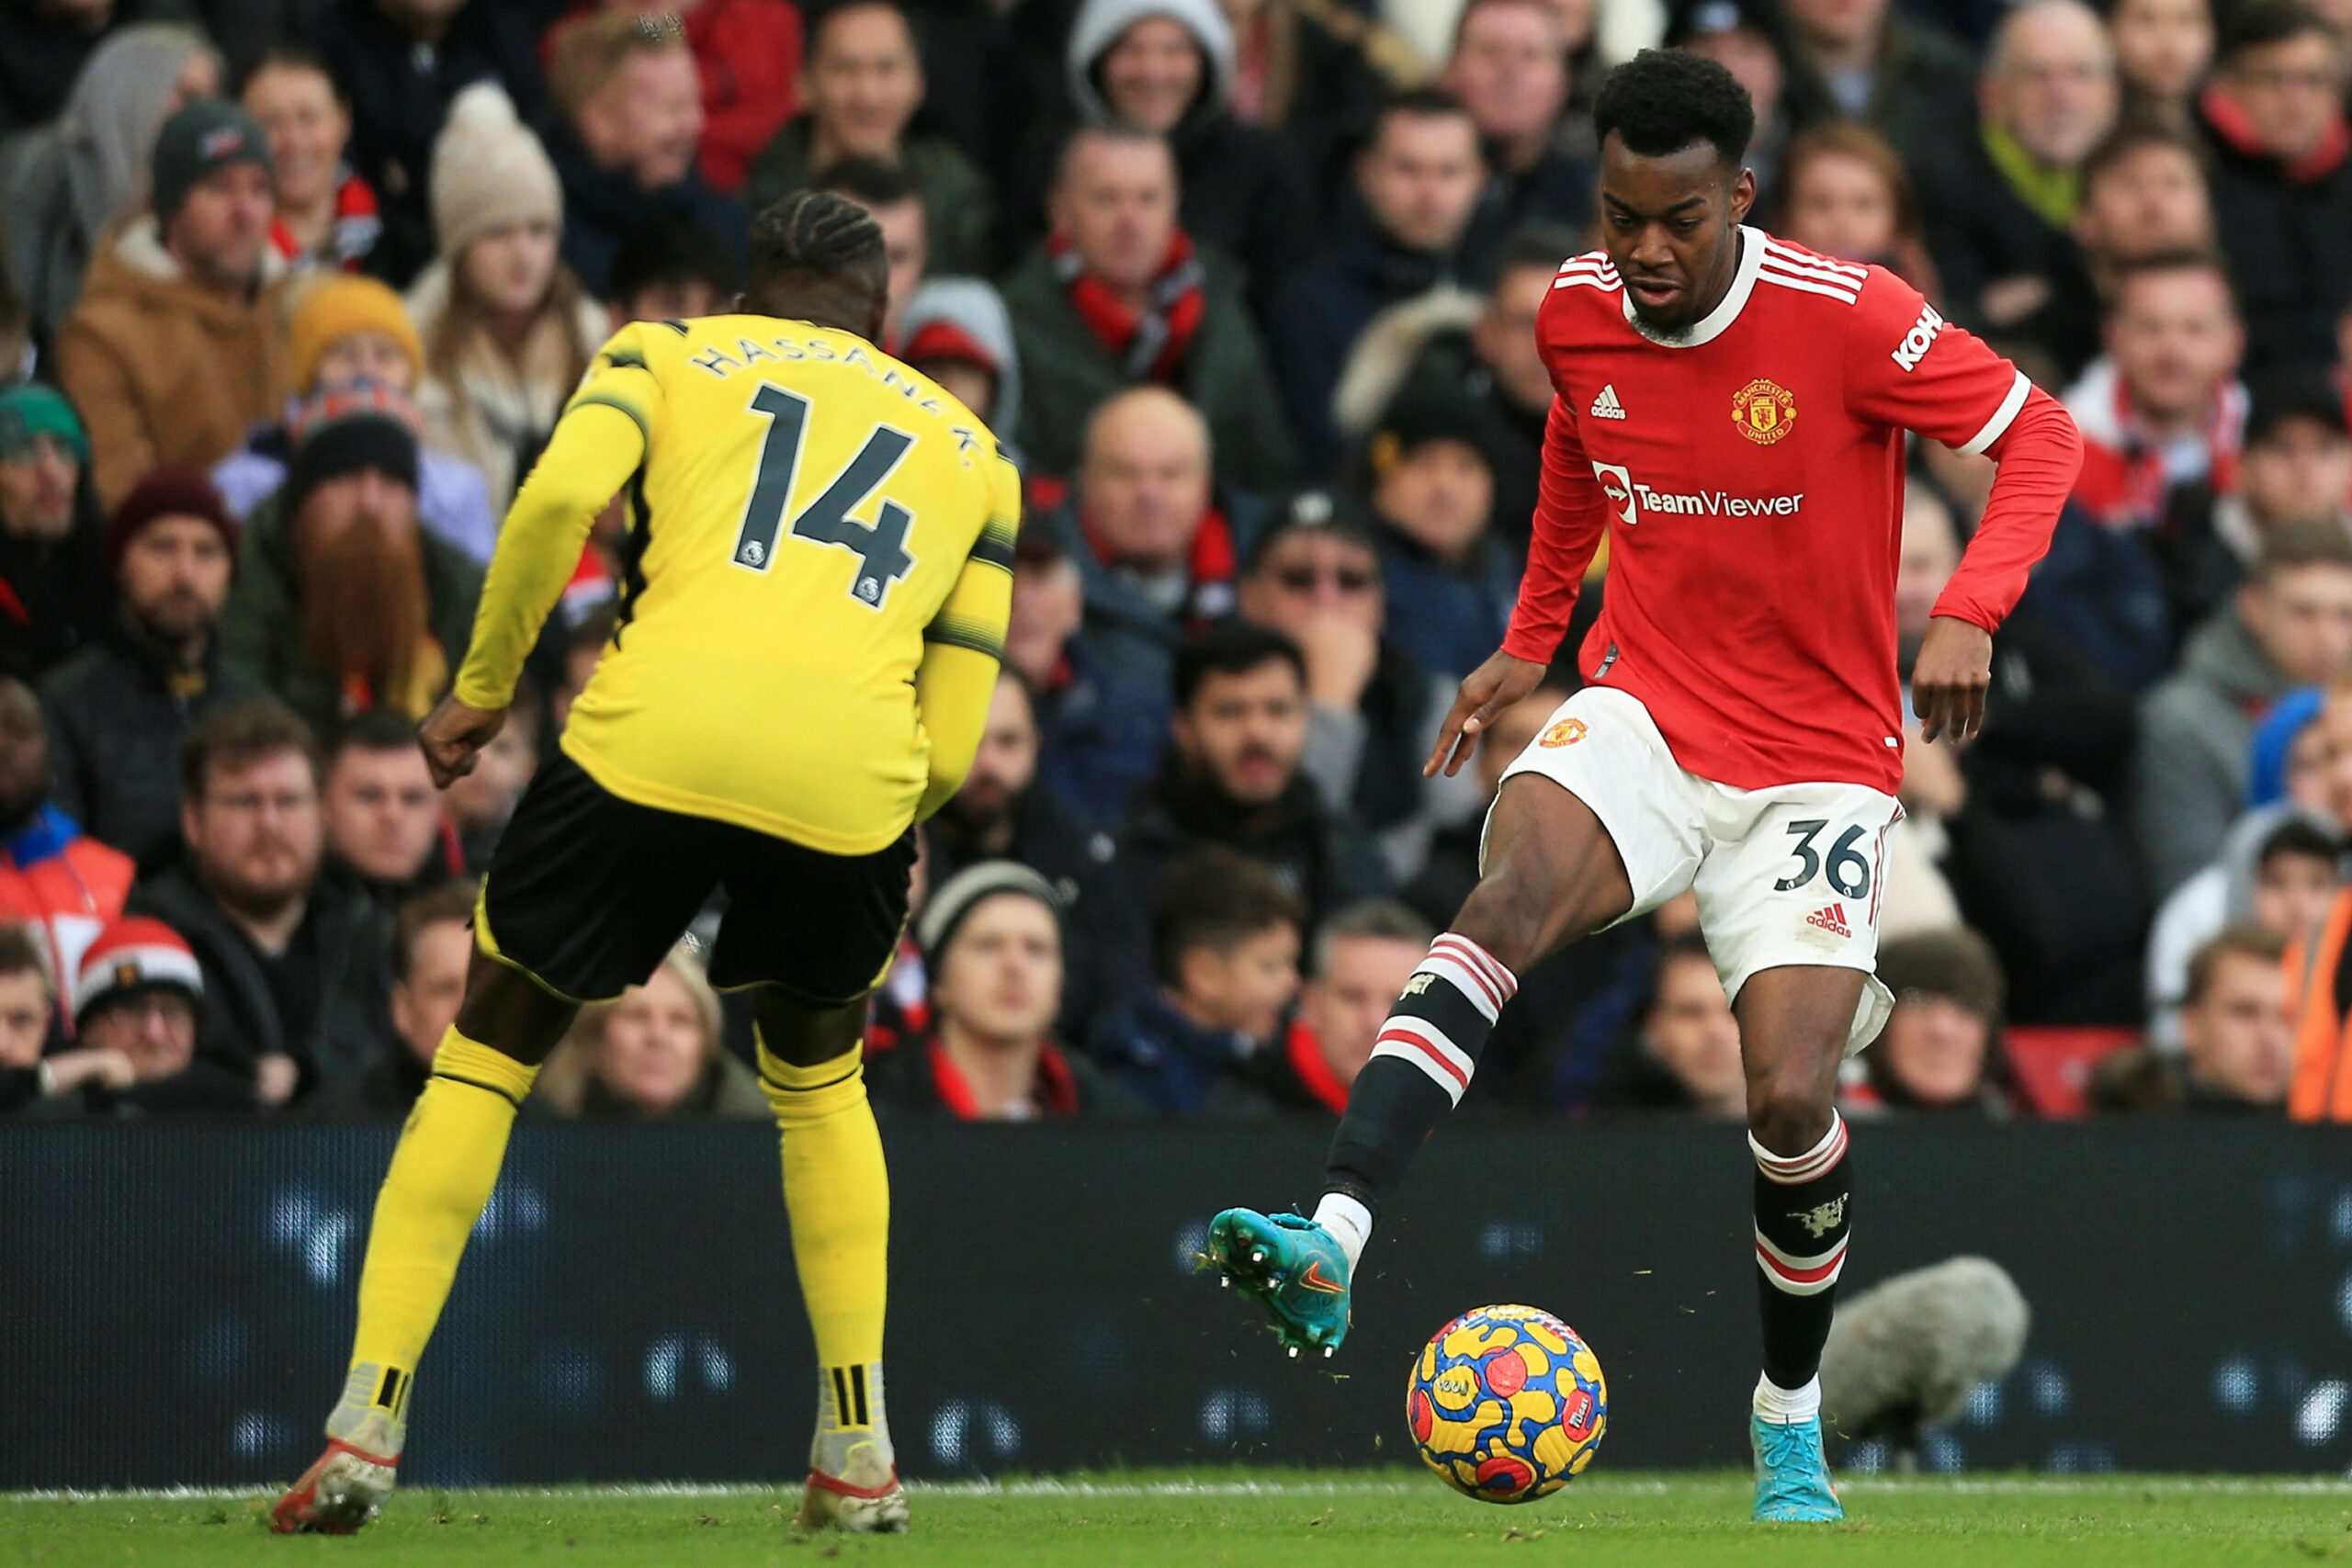          Manchester United winger says former coach used him in the wrong position last season